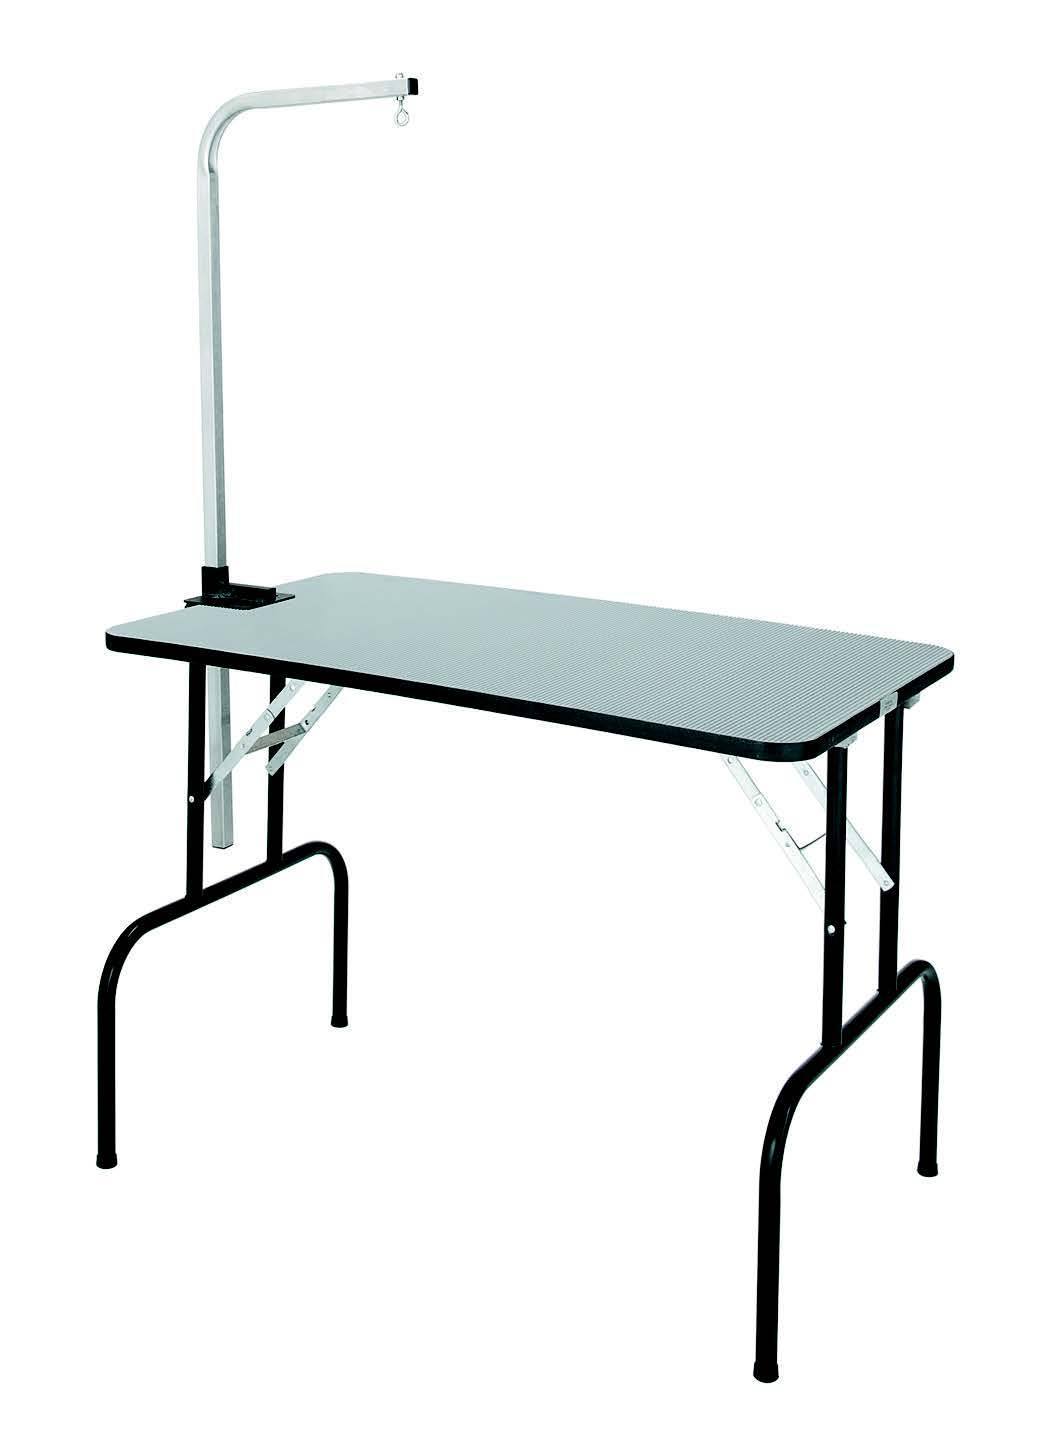 Portable Grooming Table | Folding Legs - 42" x 24"-Grooming Tables-Pet's Choice Supply